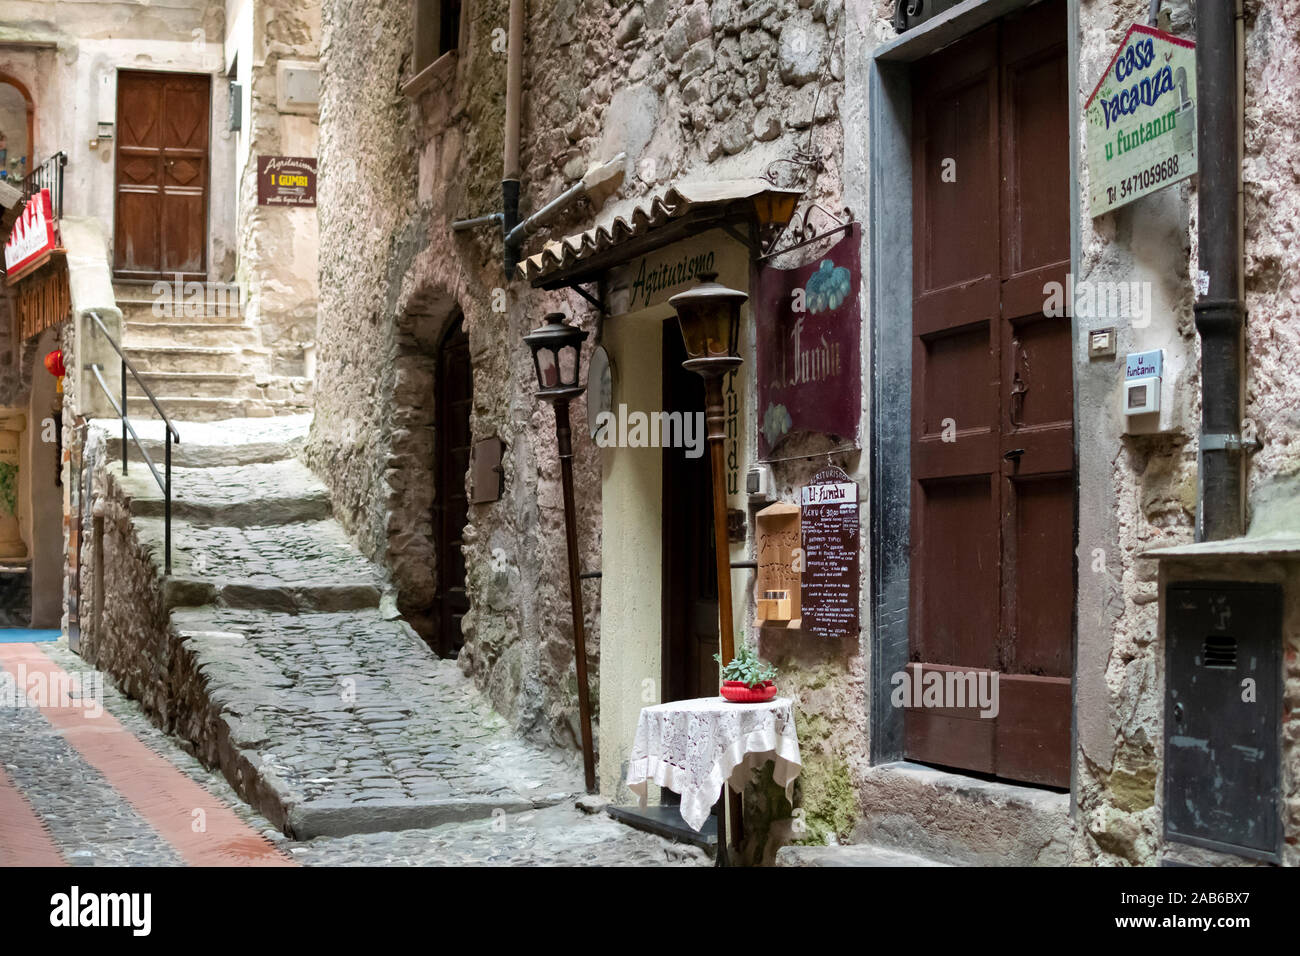 A small, picturesque Agriturismo cafe with a vacation rental home next door in the center of the ancient medieval village of Dolceacqua, Italy. Stock Photo